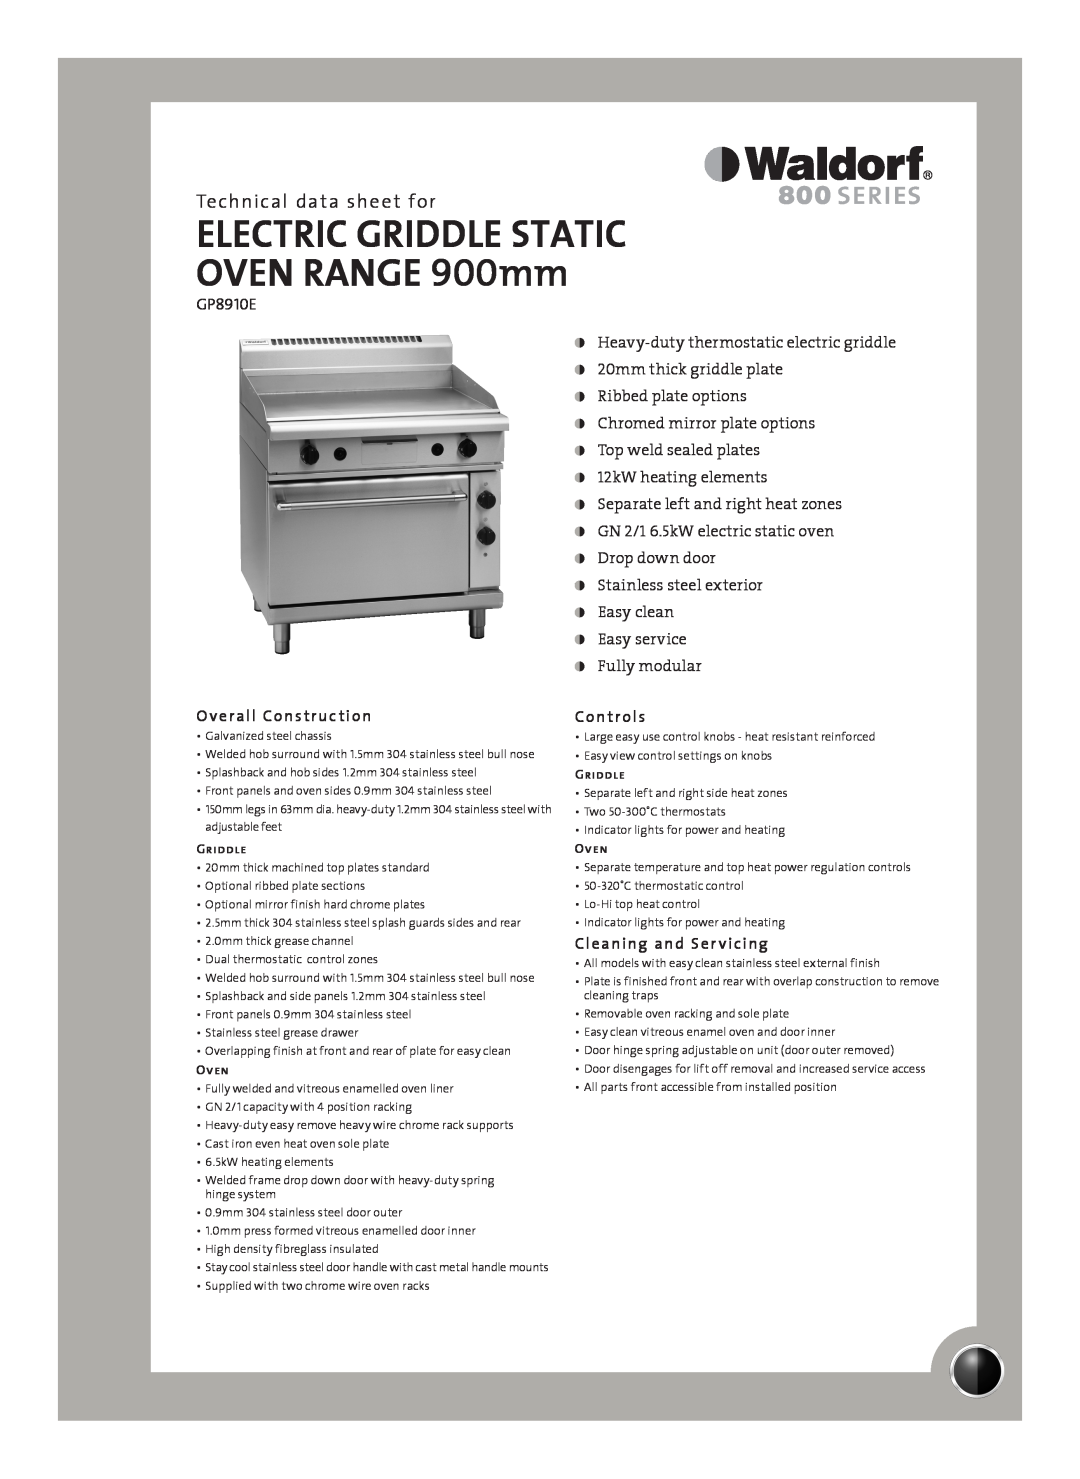 Moffat GP8910E manual Technical data sheet for, Overall Construction, Controls, Cleaning and Ser vicing, Griddle, Oven 